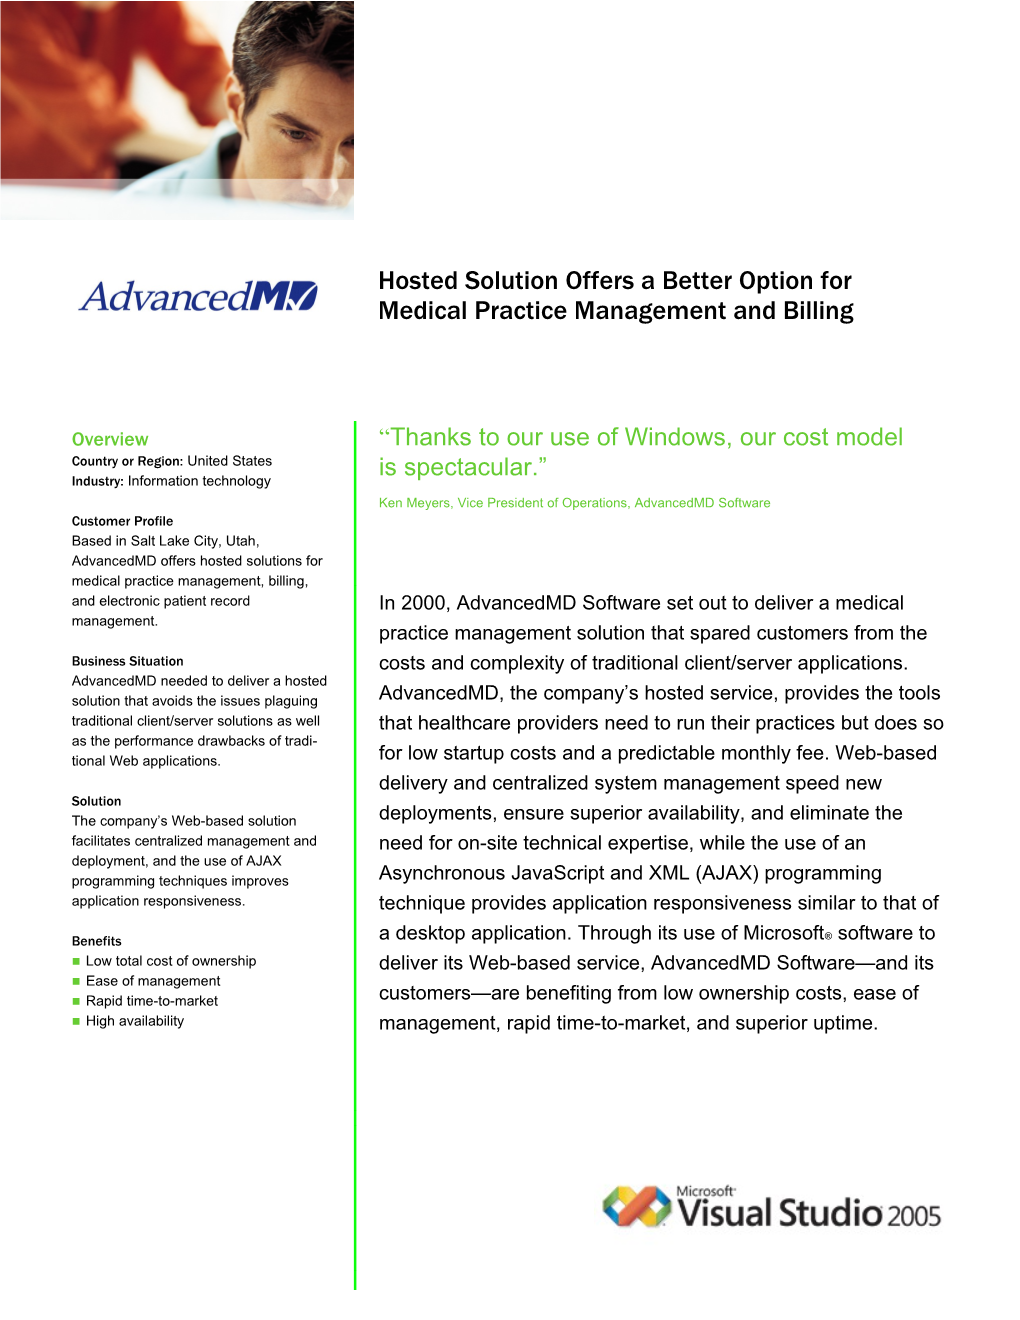 Hosted Solution Offers a Better Option for Medical Practice Management and Billing